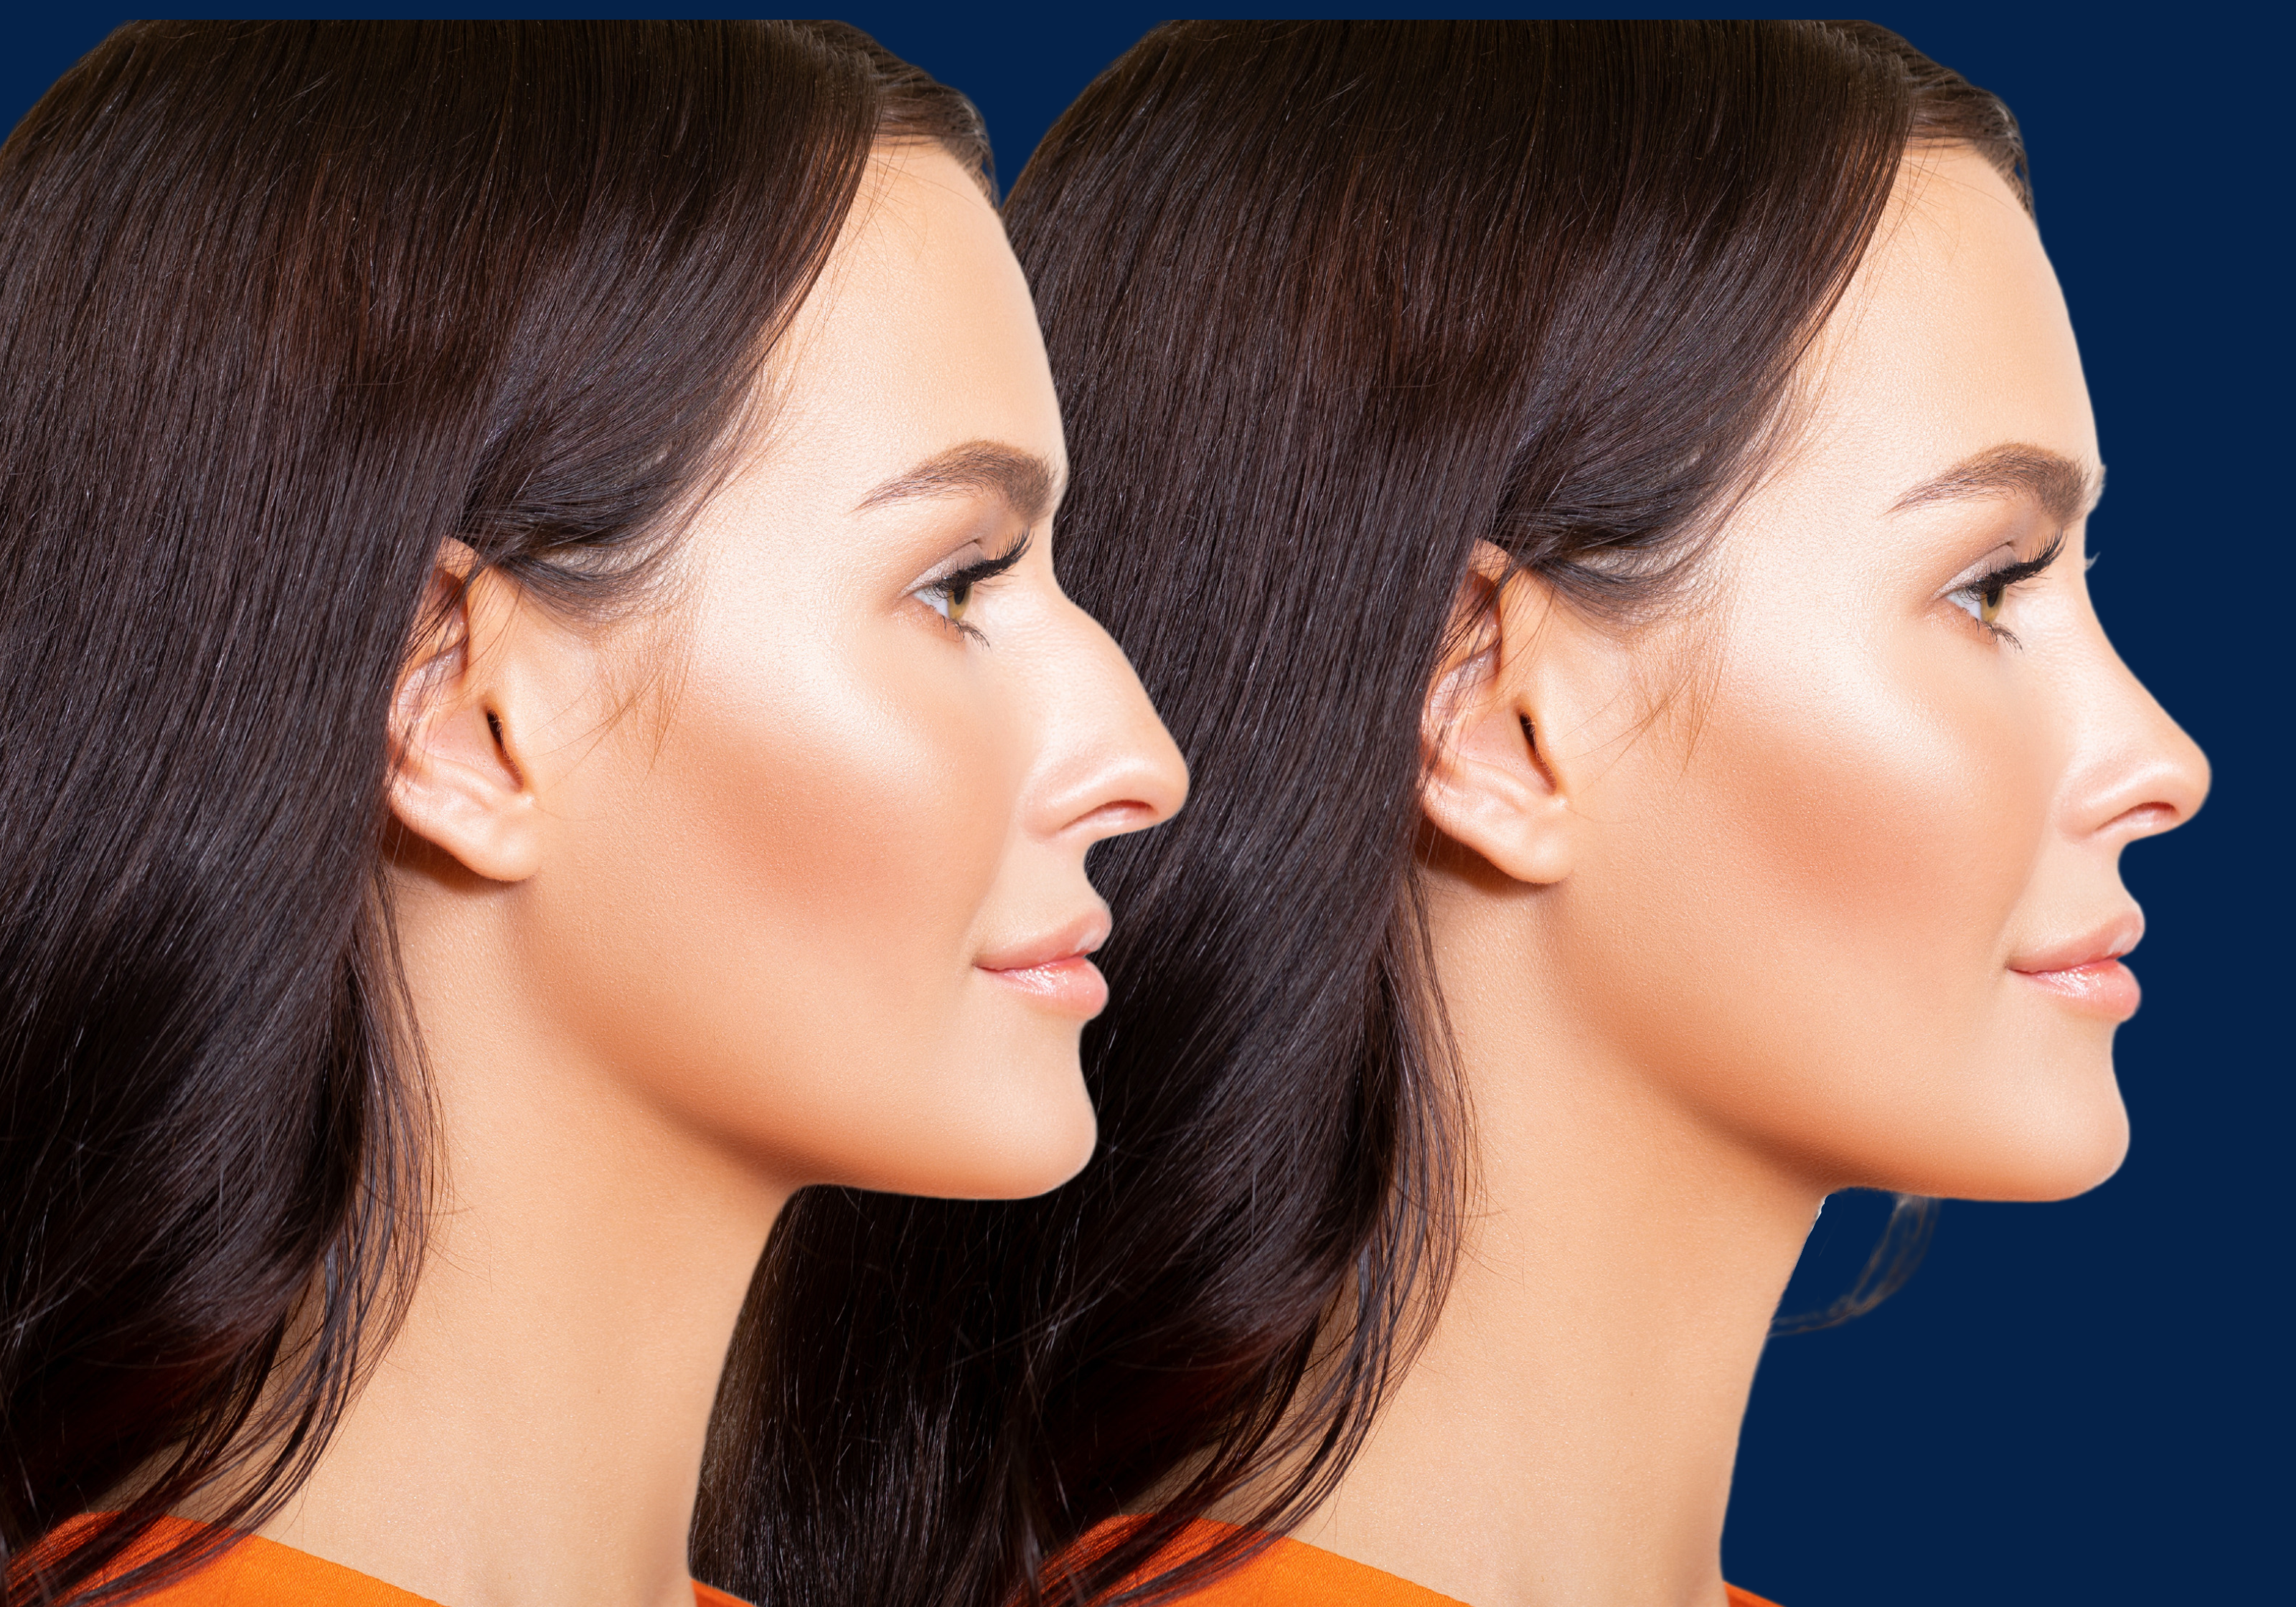 Before and After Rhinoplasty of a brunette woman